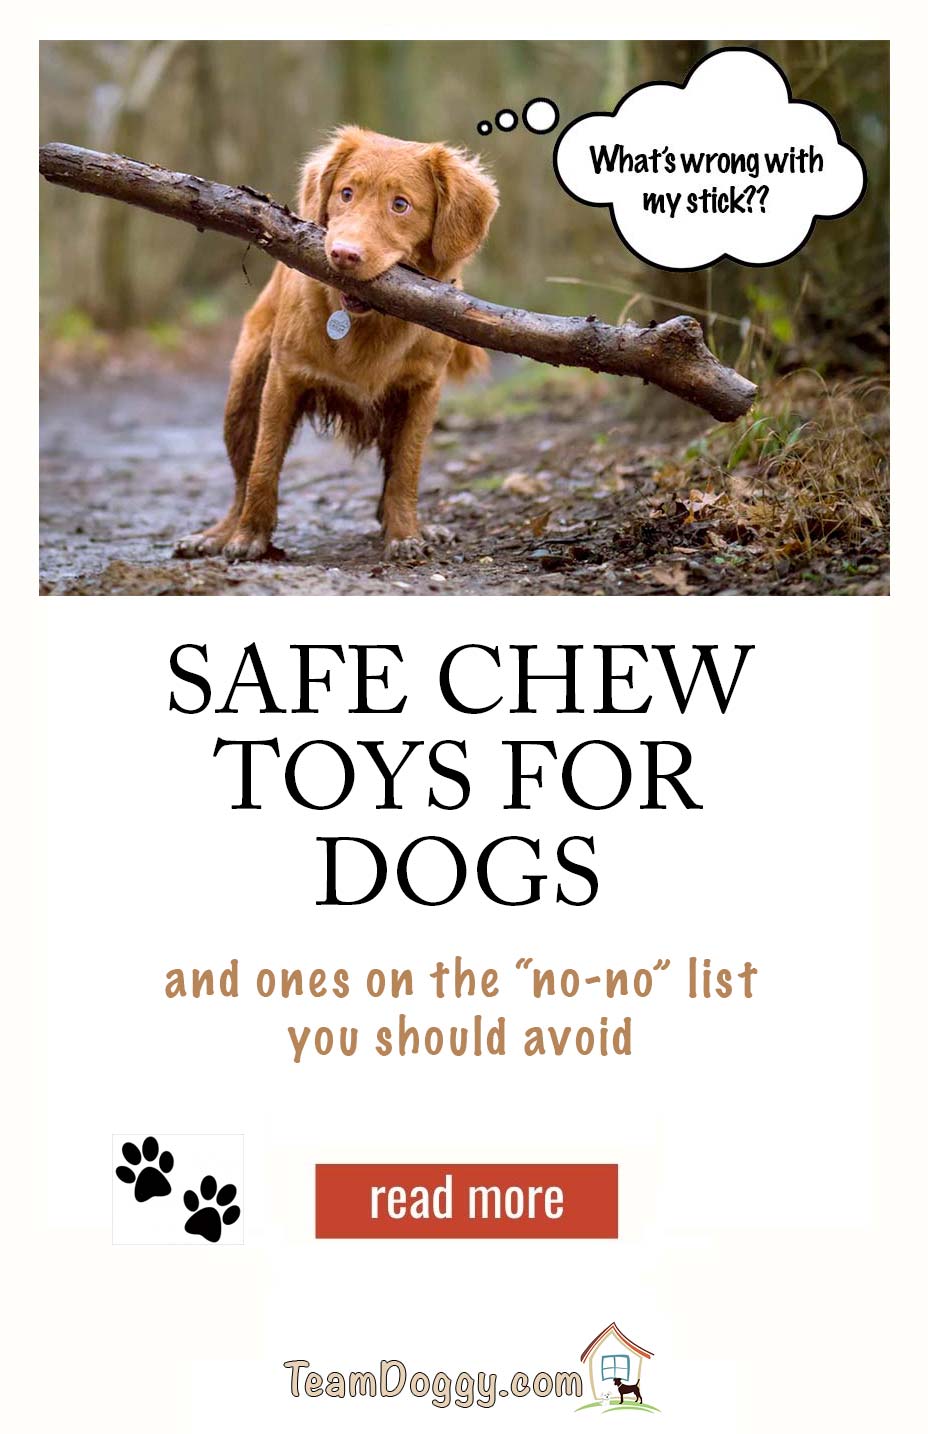 safe chew toys for dogs and some to avoid